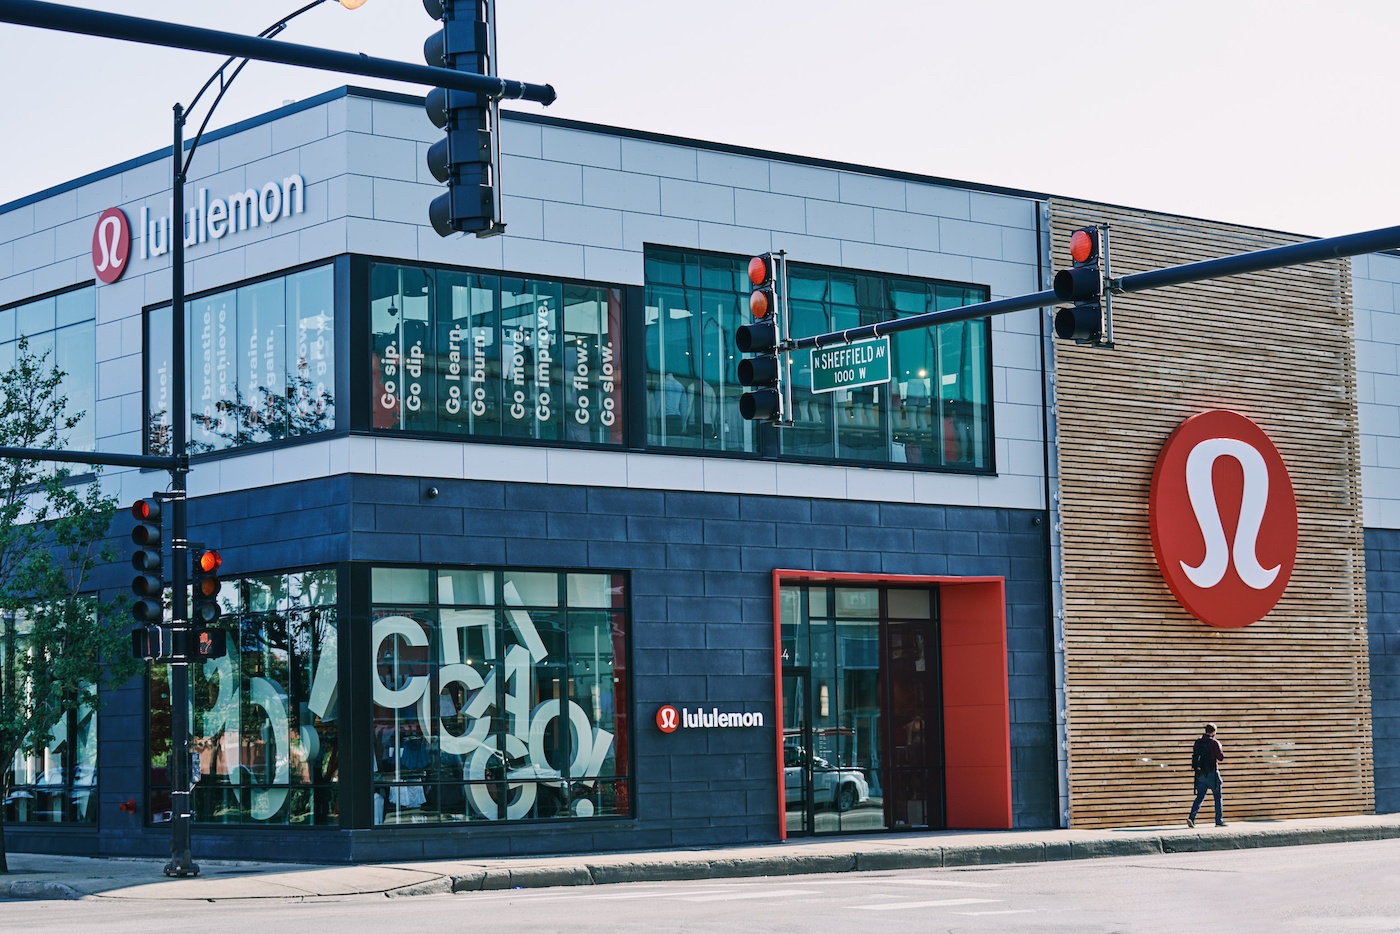 Lululemon withholds guidance for 2020 due to COVID-19 as Q4